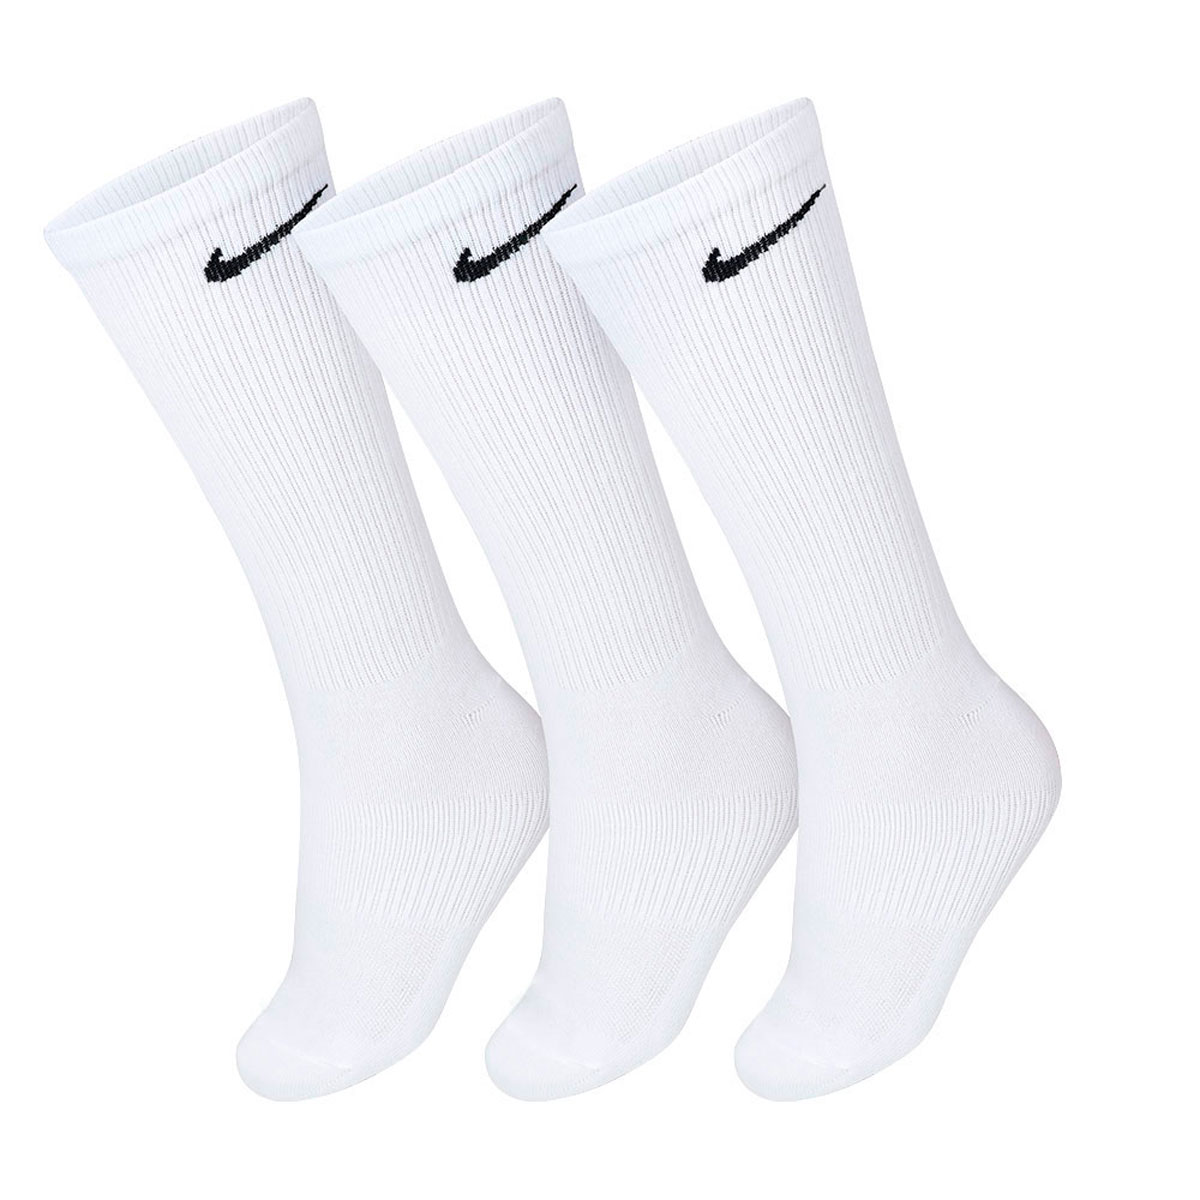 https://static.prospin.com.br/media/catalog/product/s/x/sx7676-100-3943-meia-nike-everyday-cotton-lightweight-pack-03-pares-39-ao-43-branca.jpg